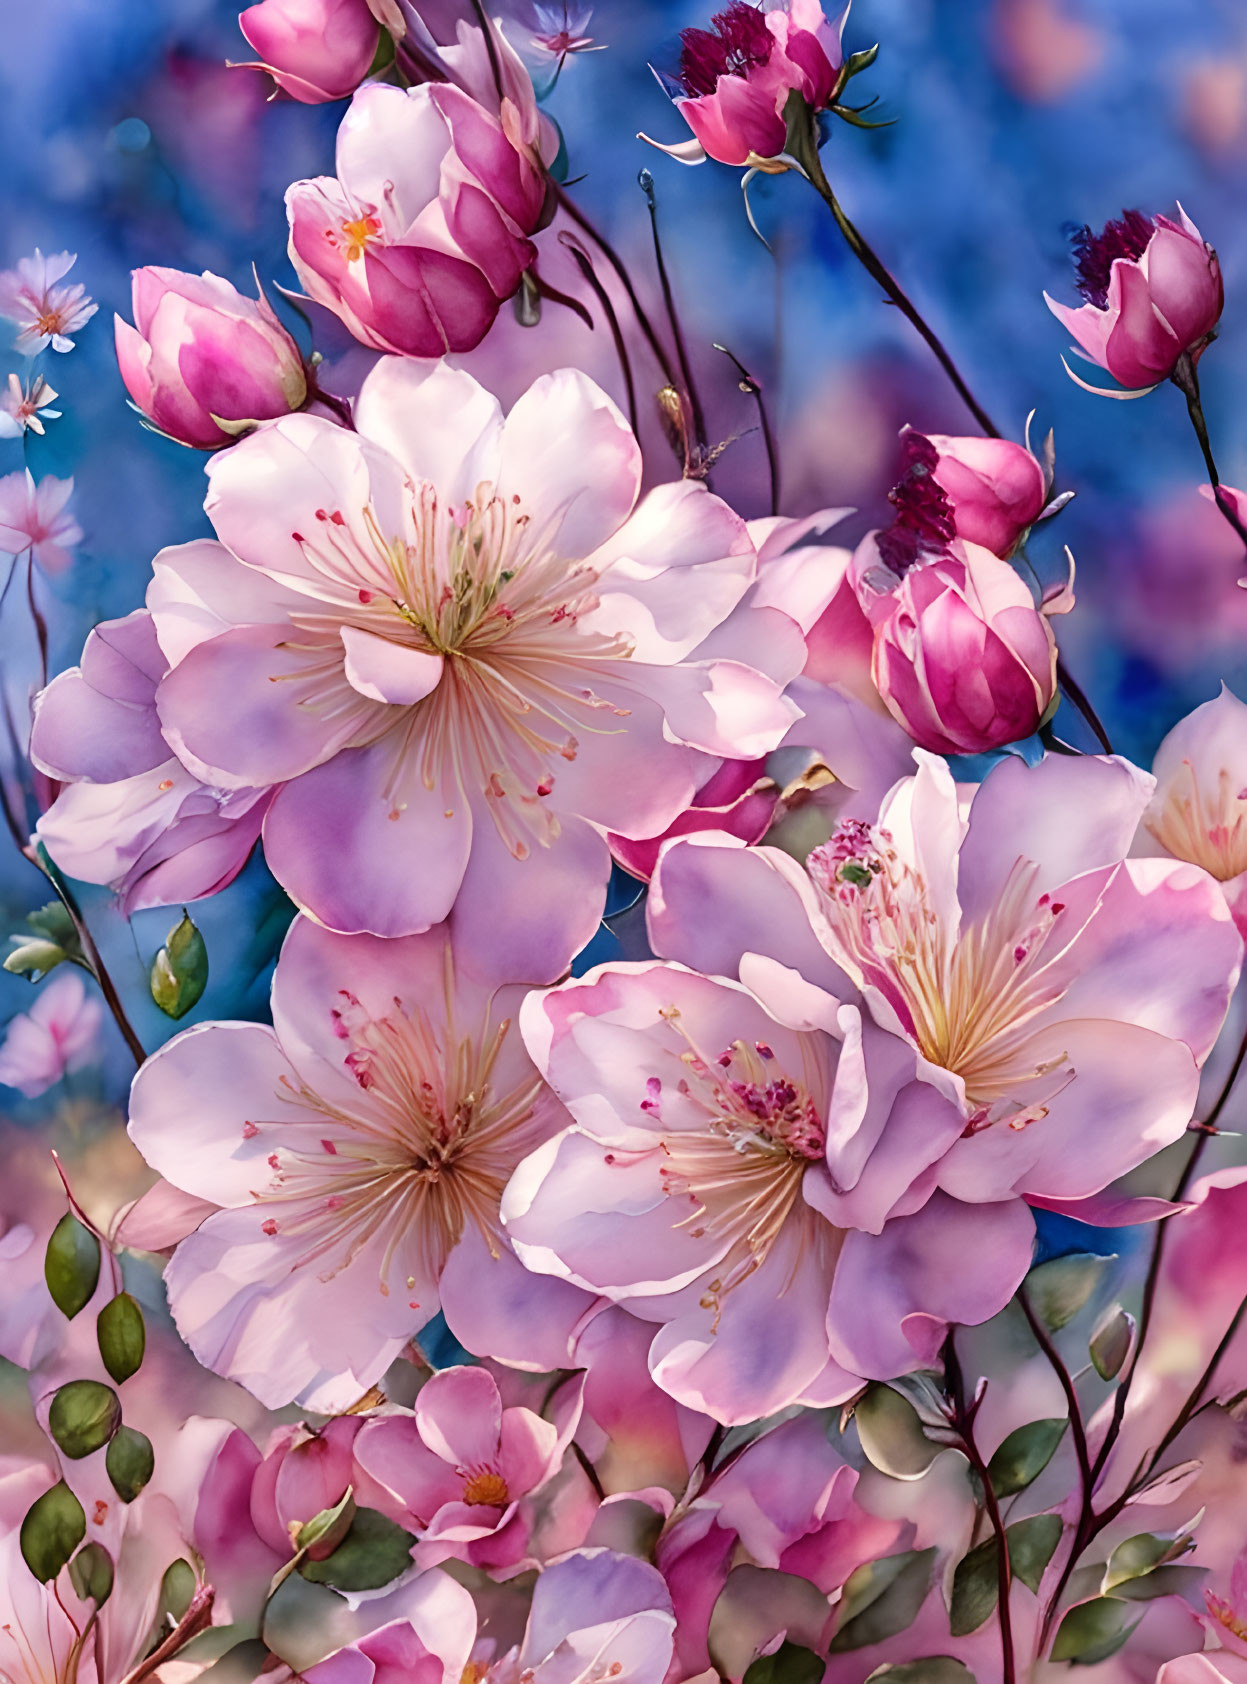 Pink Cherry Blossoms on Blurred Blue Background